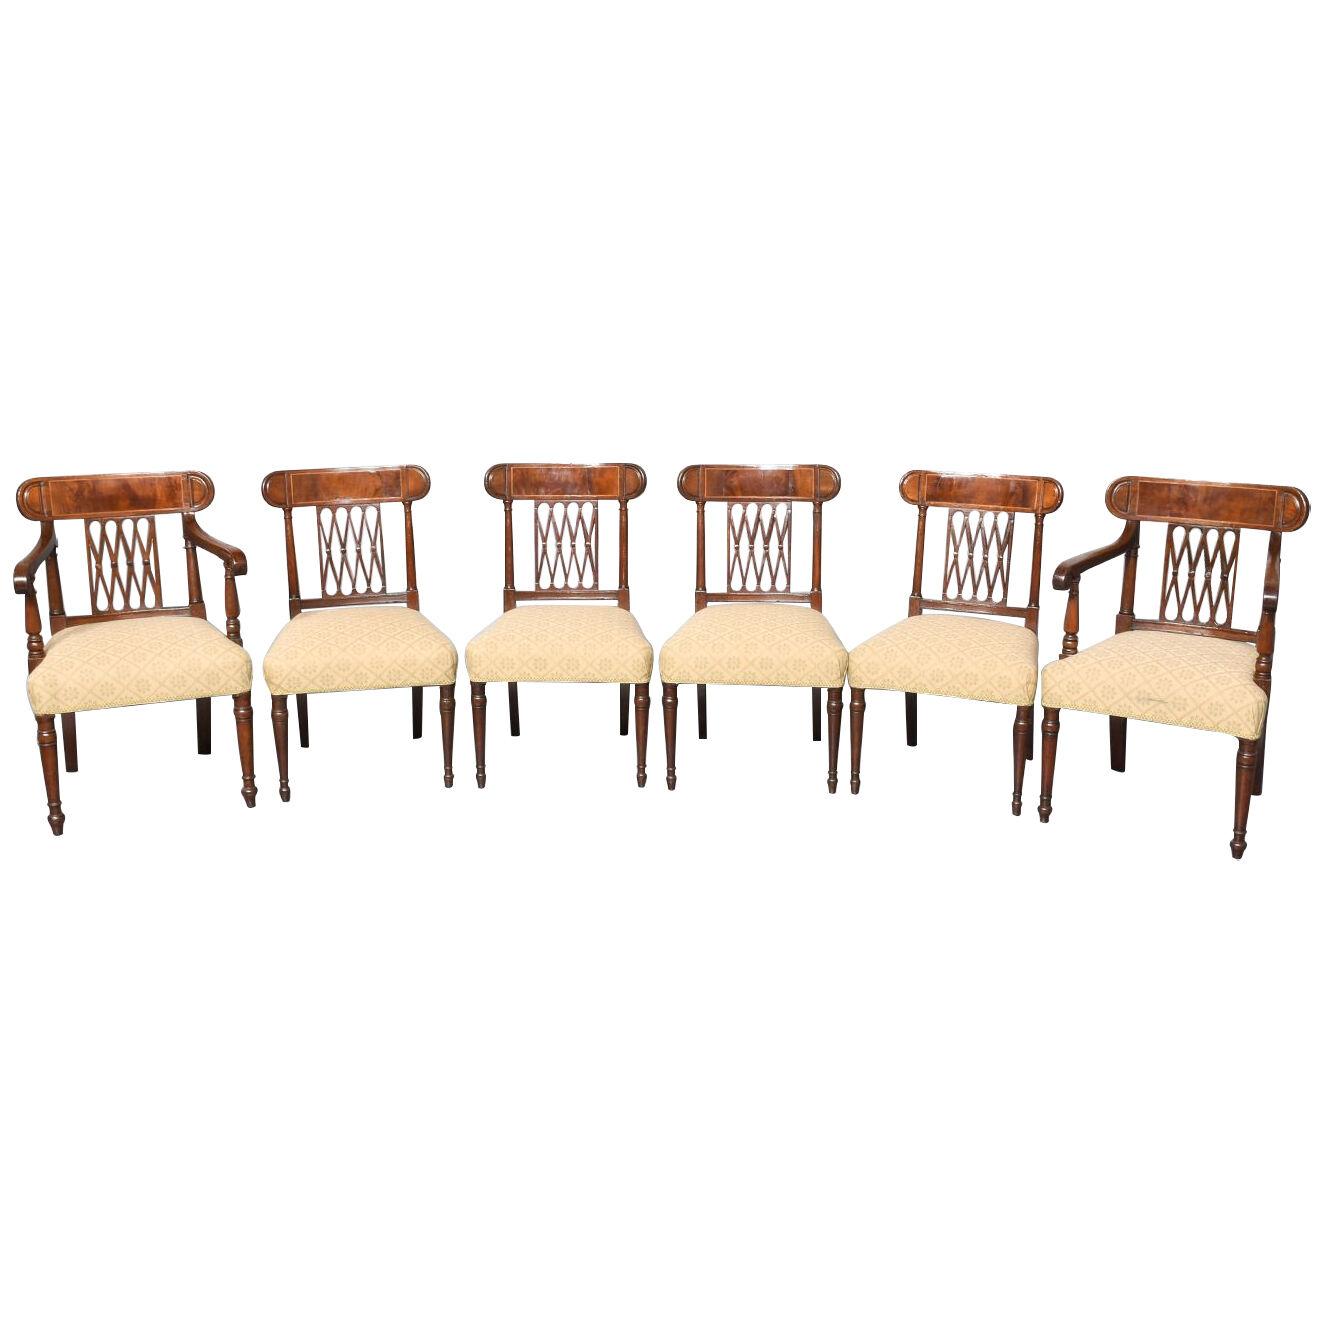 Set of 6 George III Dining Chairs